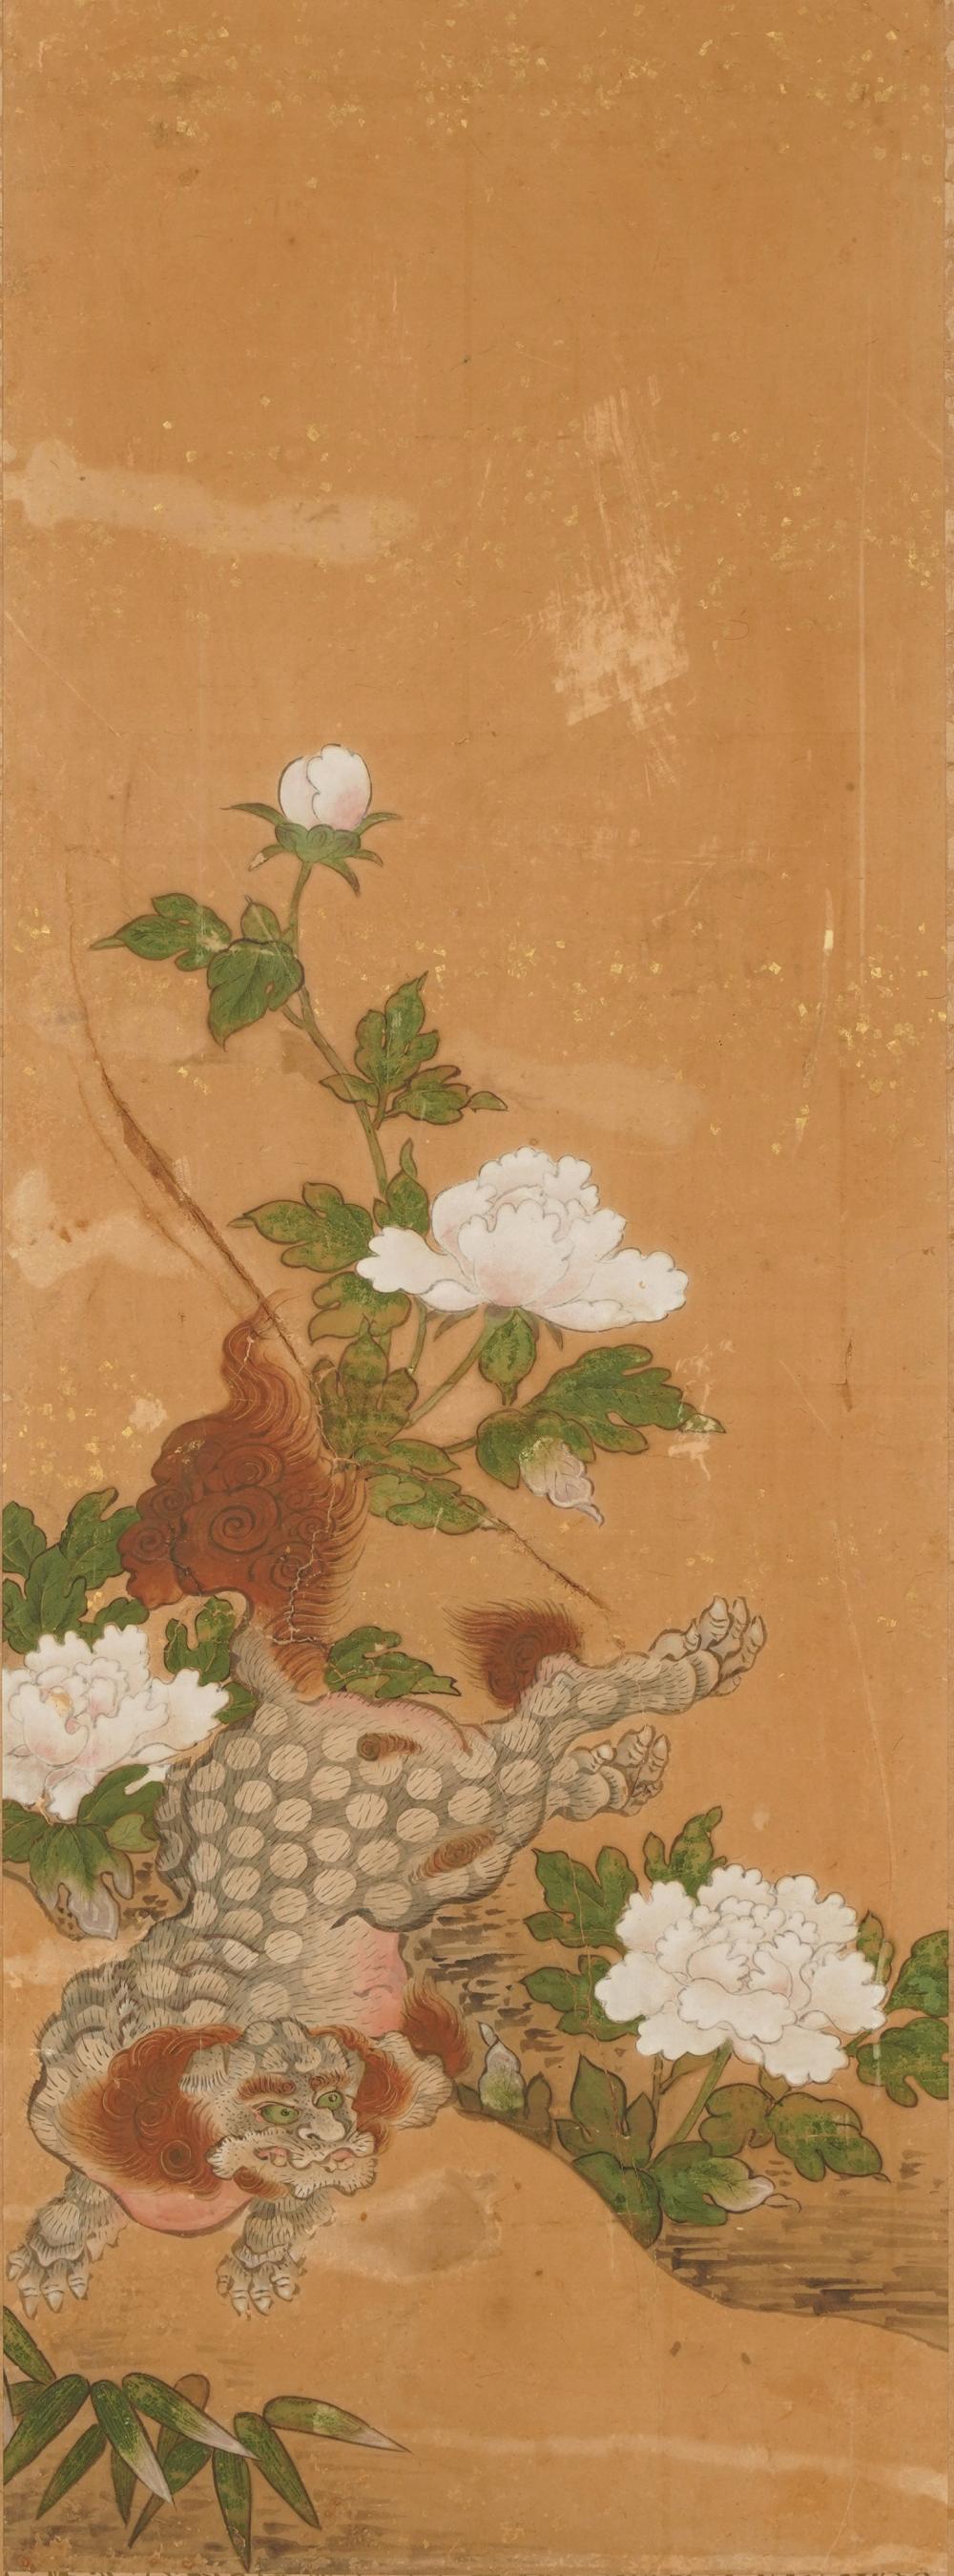 JAPANESE SCROLL PAINTING18th century;